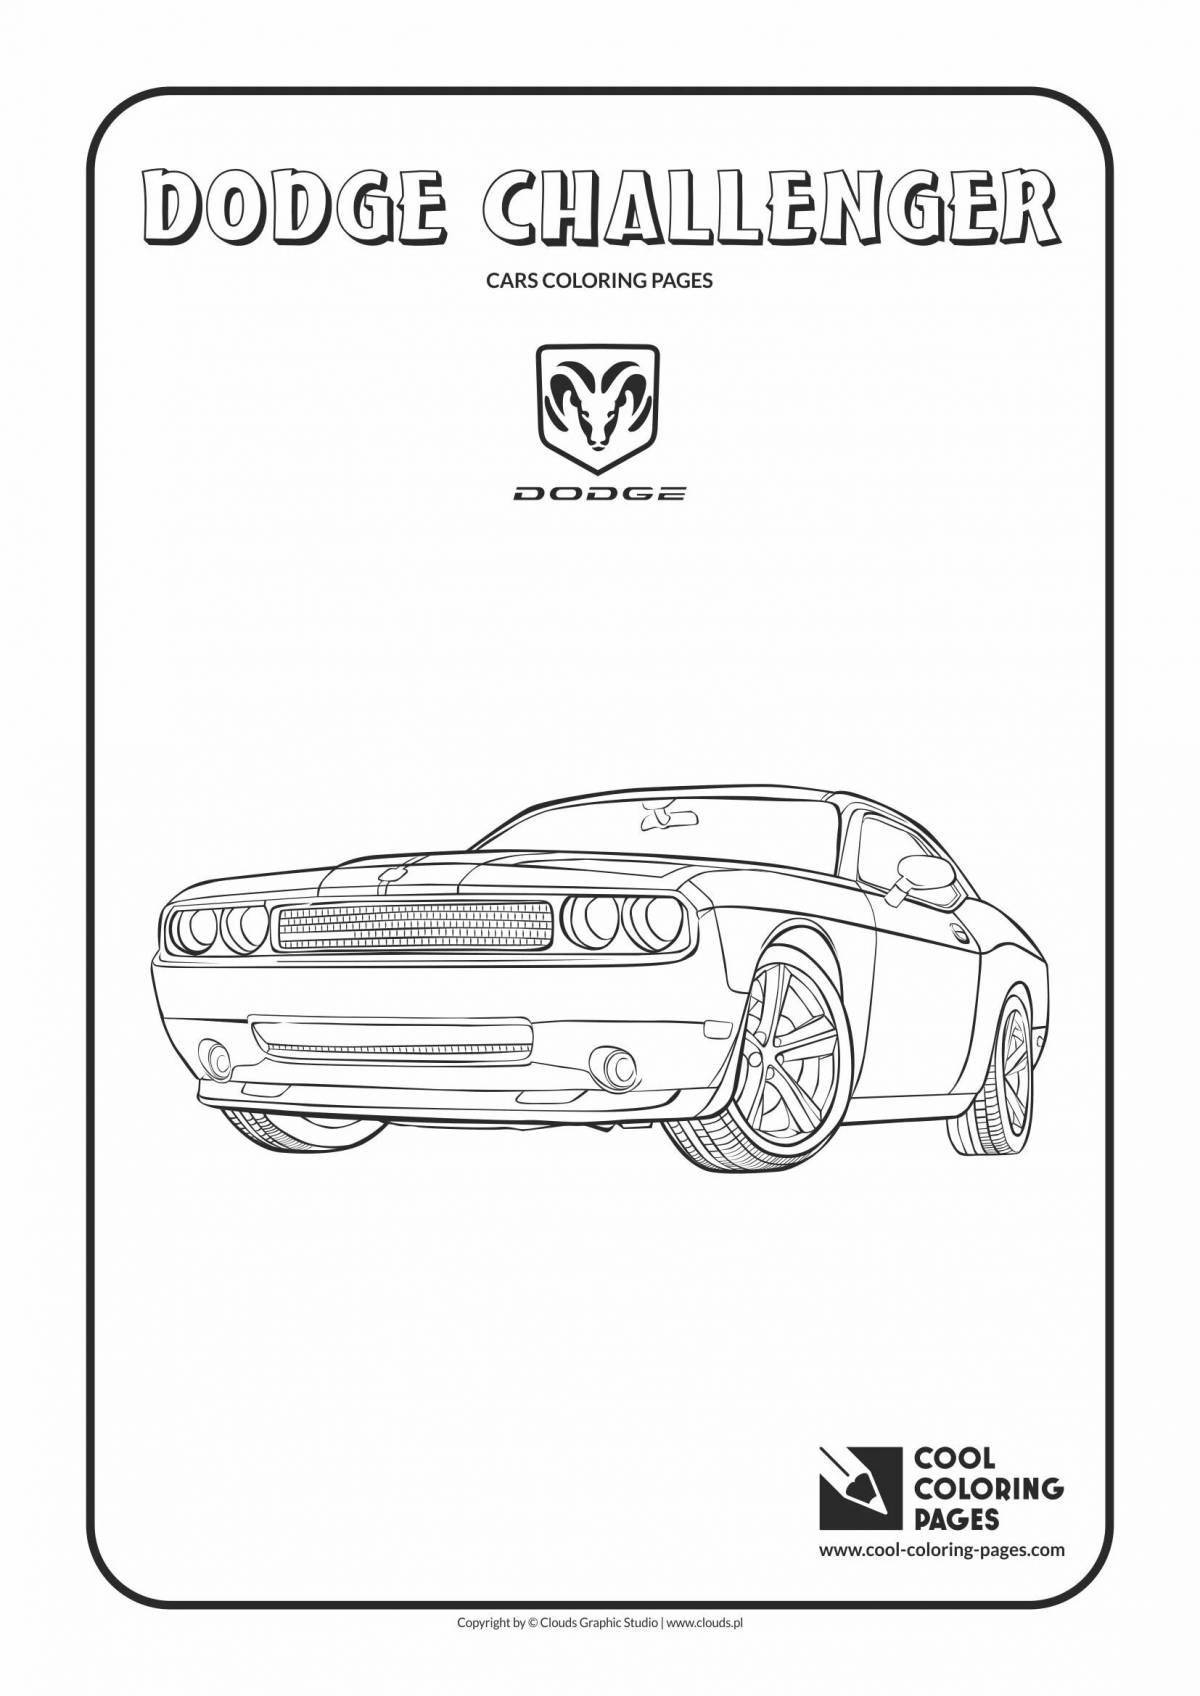 Dodge challenger bright coloring